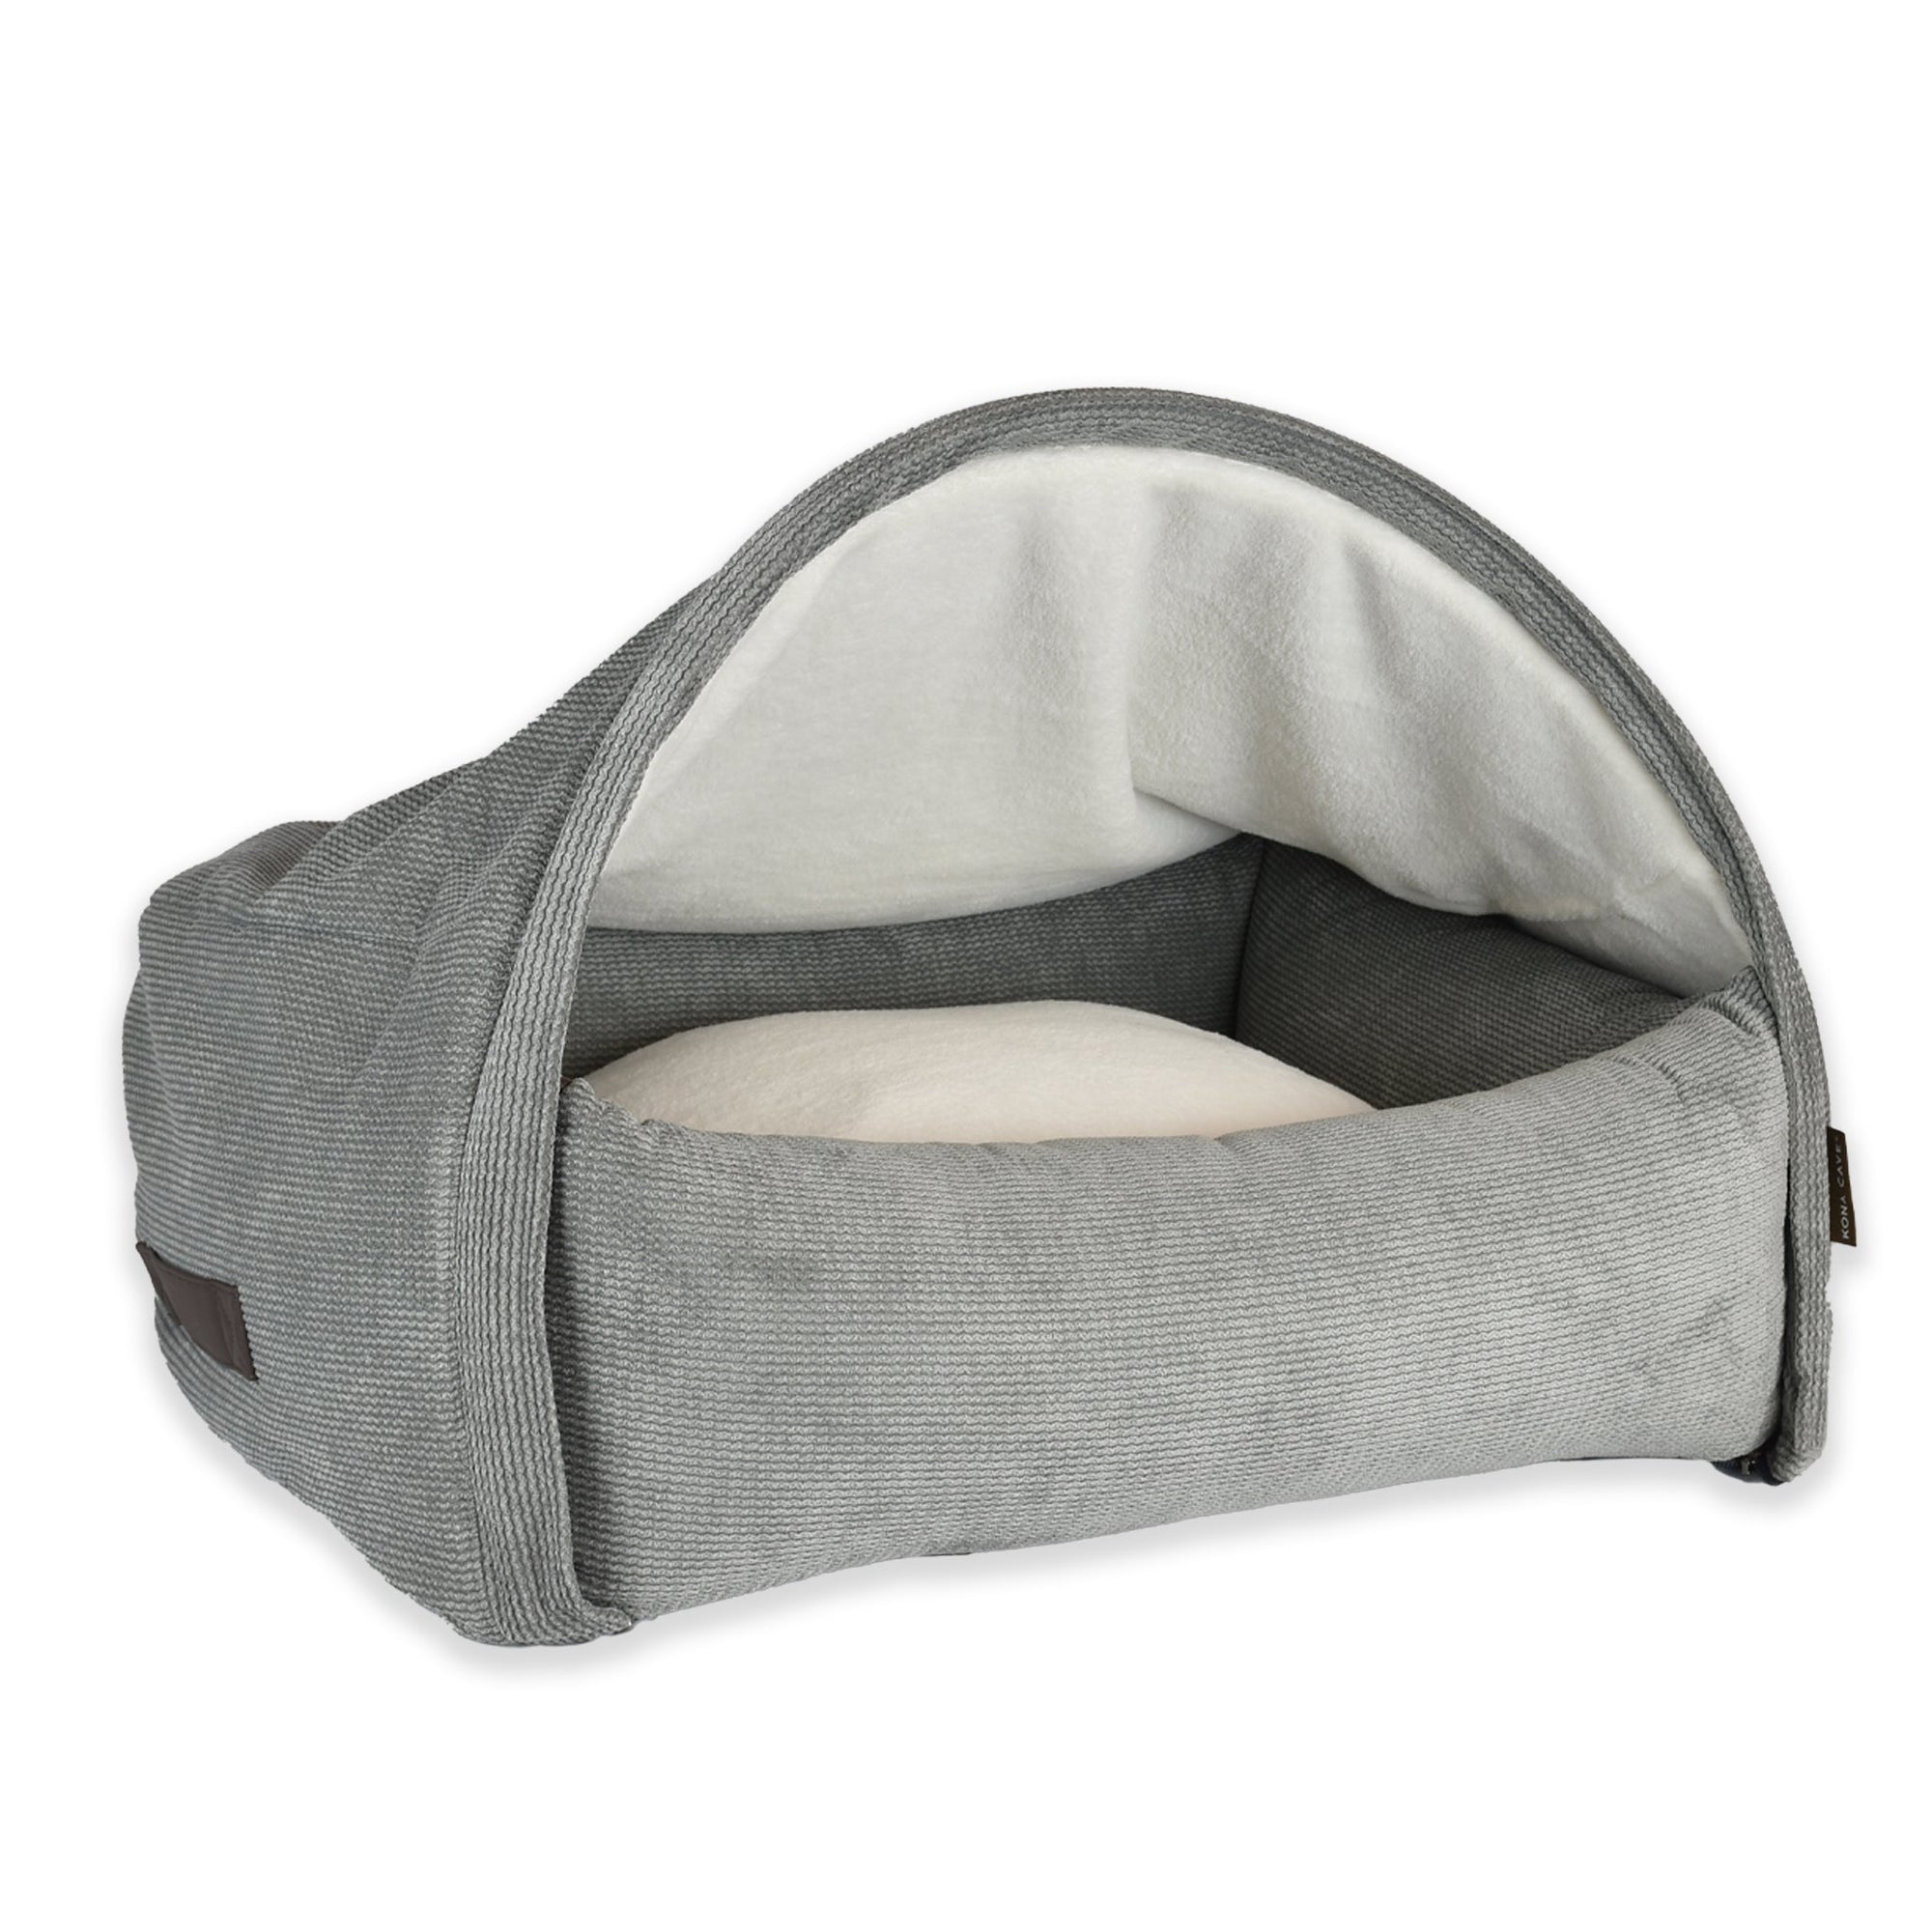 KONA CAVE®  luxury brand snuggle canopy cave cuddle bed. Grey corduroy burrow bed for dogs and cats with removable canopy cave cover. washable. Superior Patented design. 